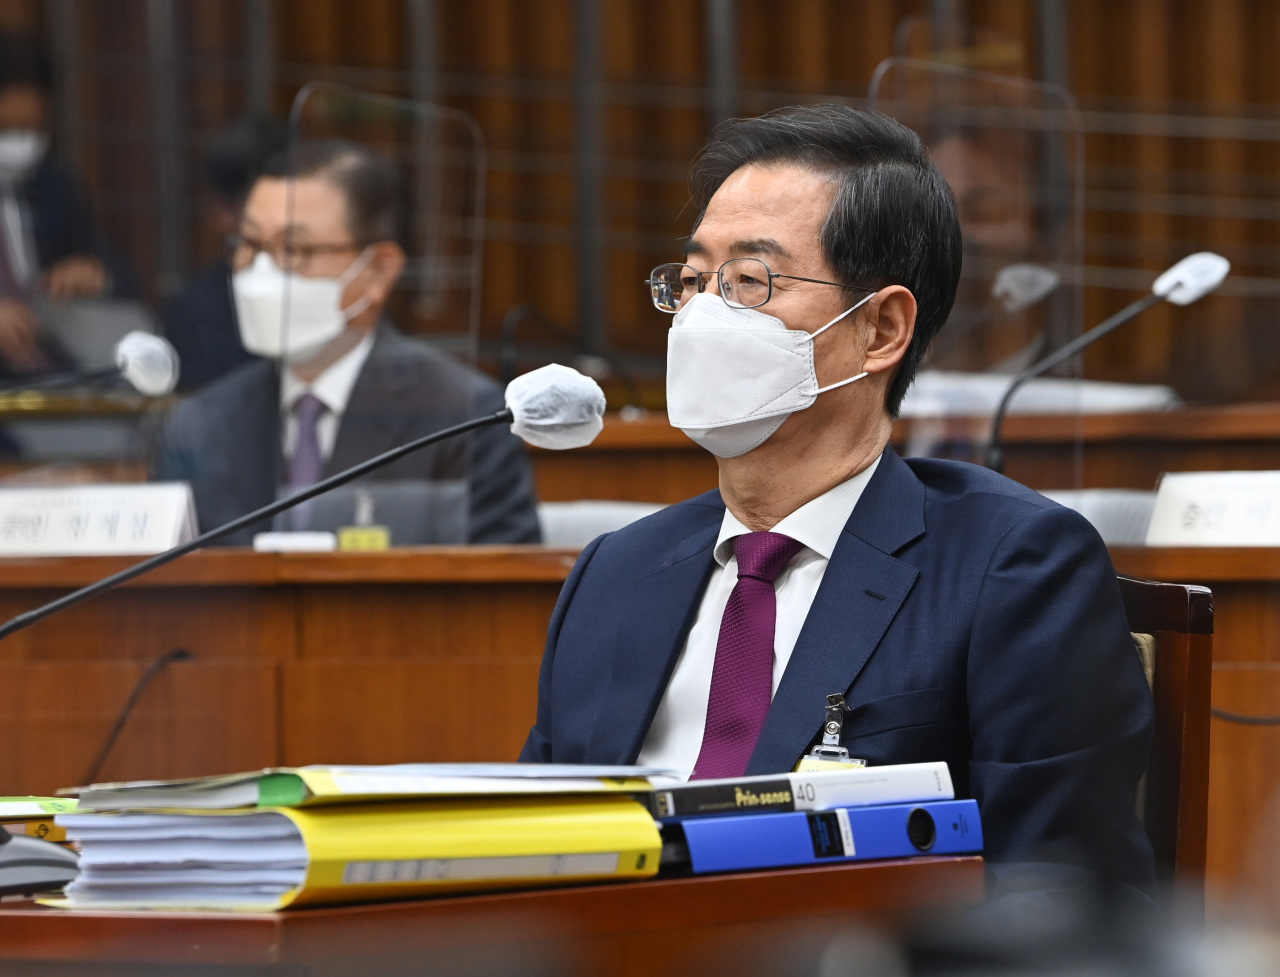 Prime Minister nominee Han Duck-soo undergoes his confirmation hearing at the National Assembly on May 3. (Joint Press Corps)